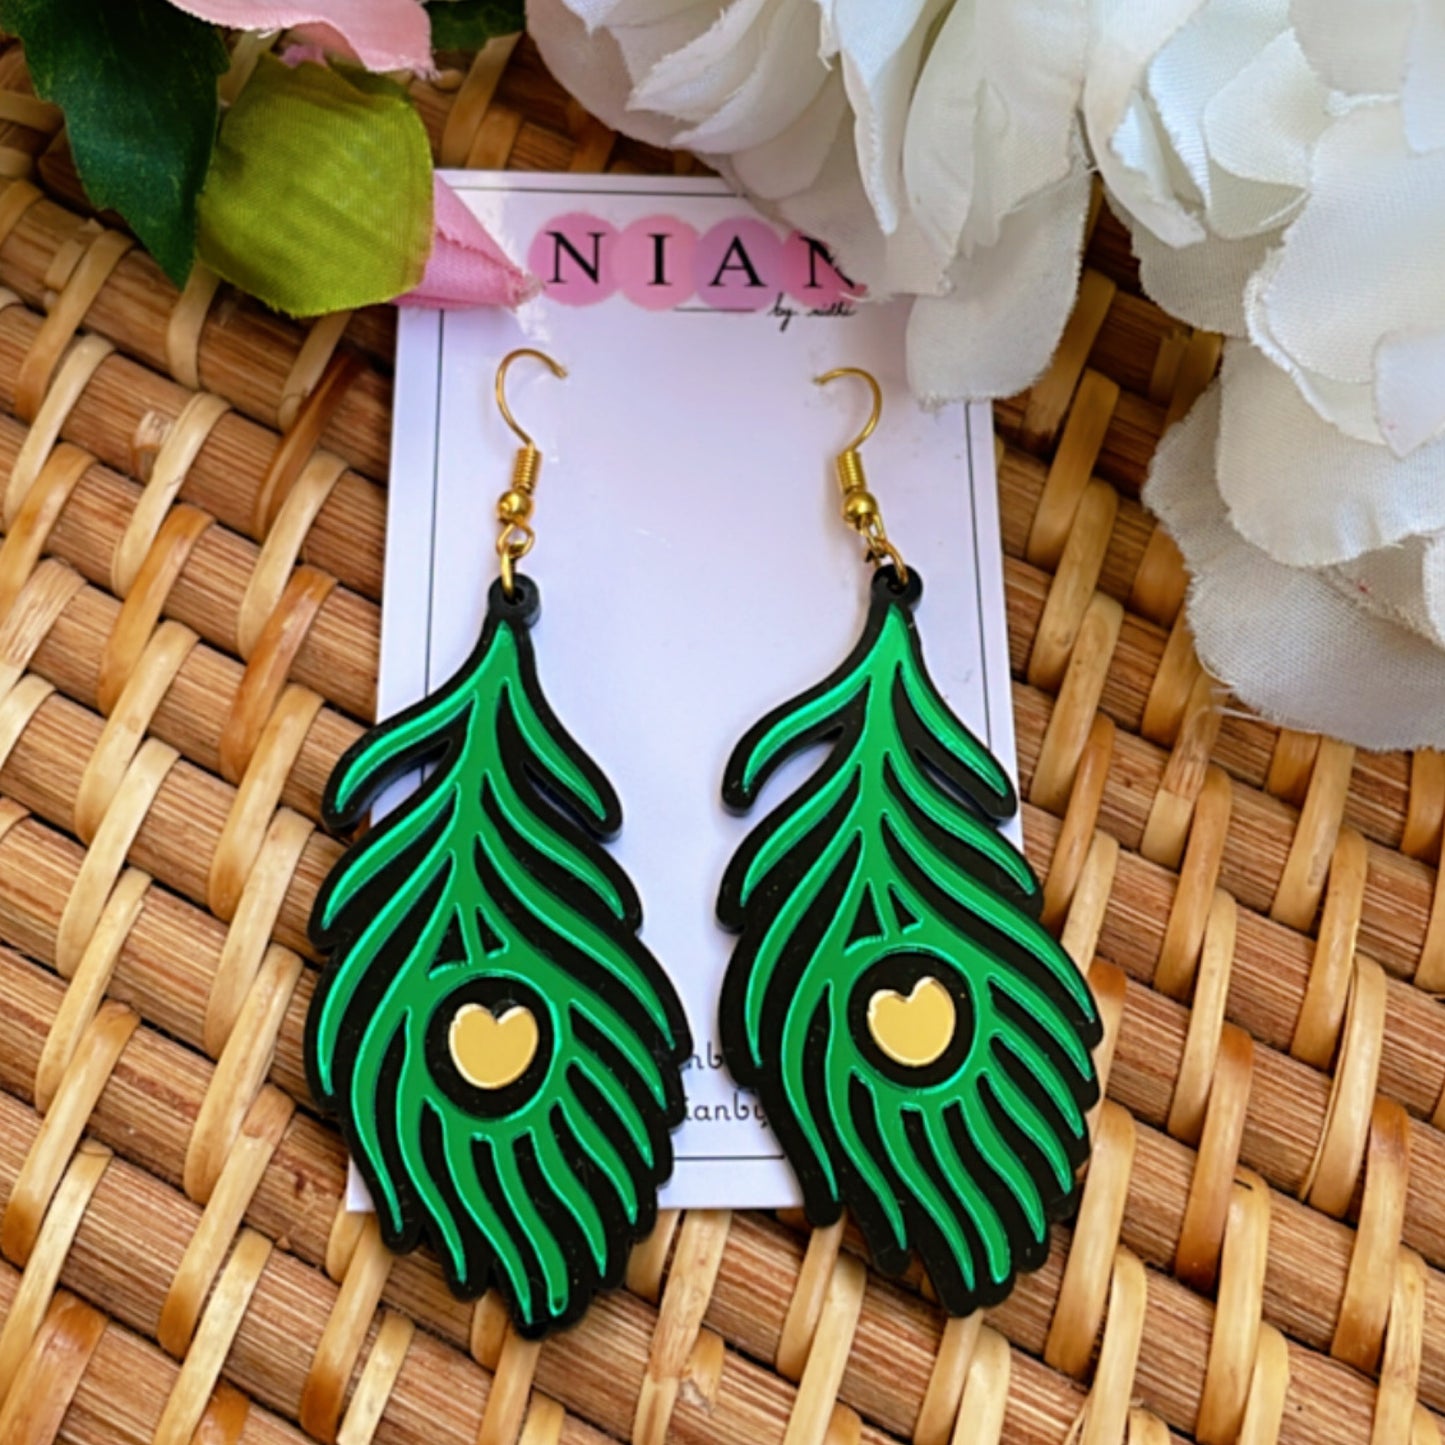 Morpankh Danglers - Glossy Green with Black and Golden details - Nian by Nidhi - placed in a brown background